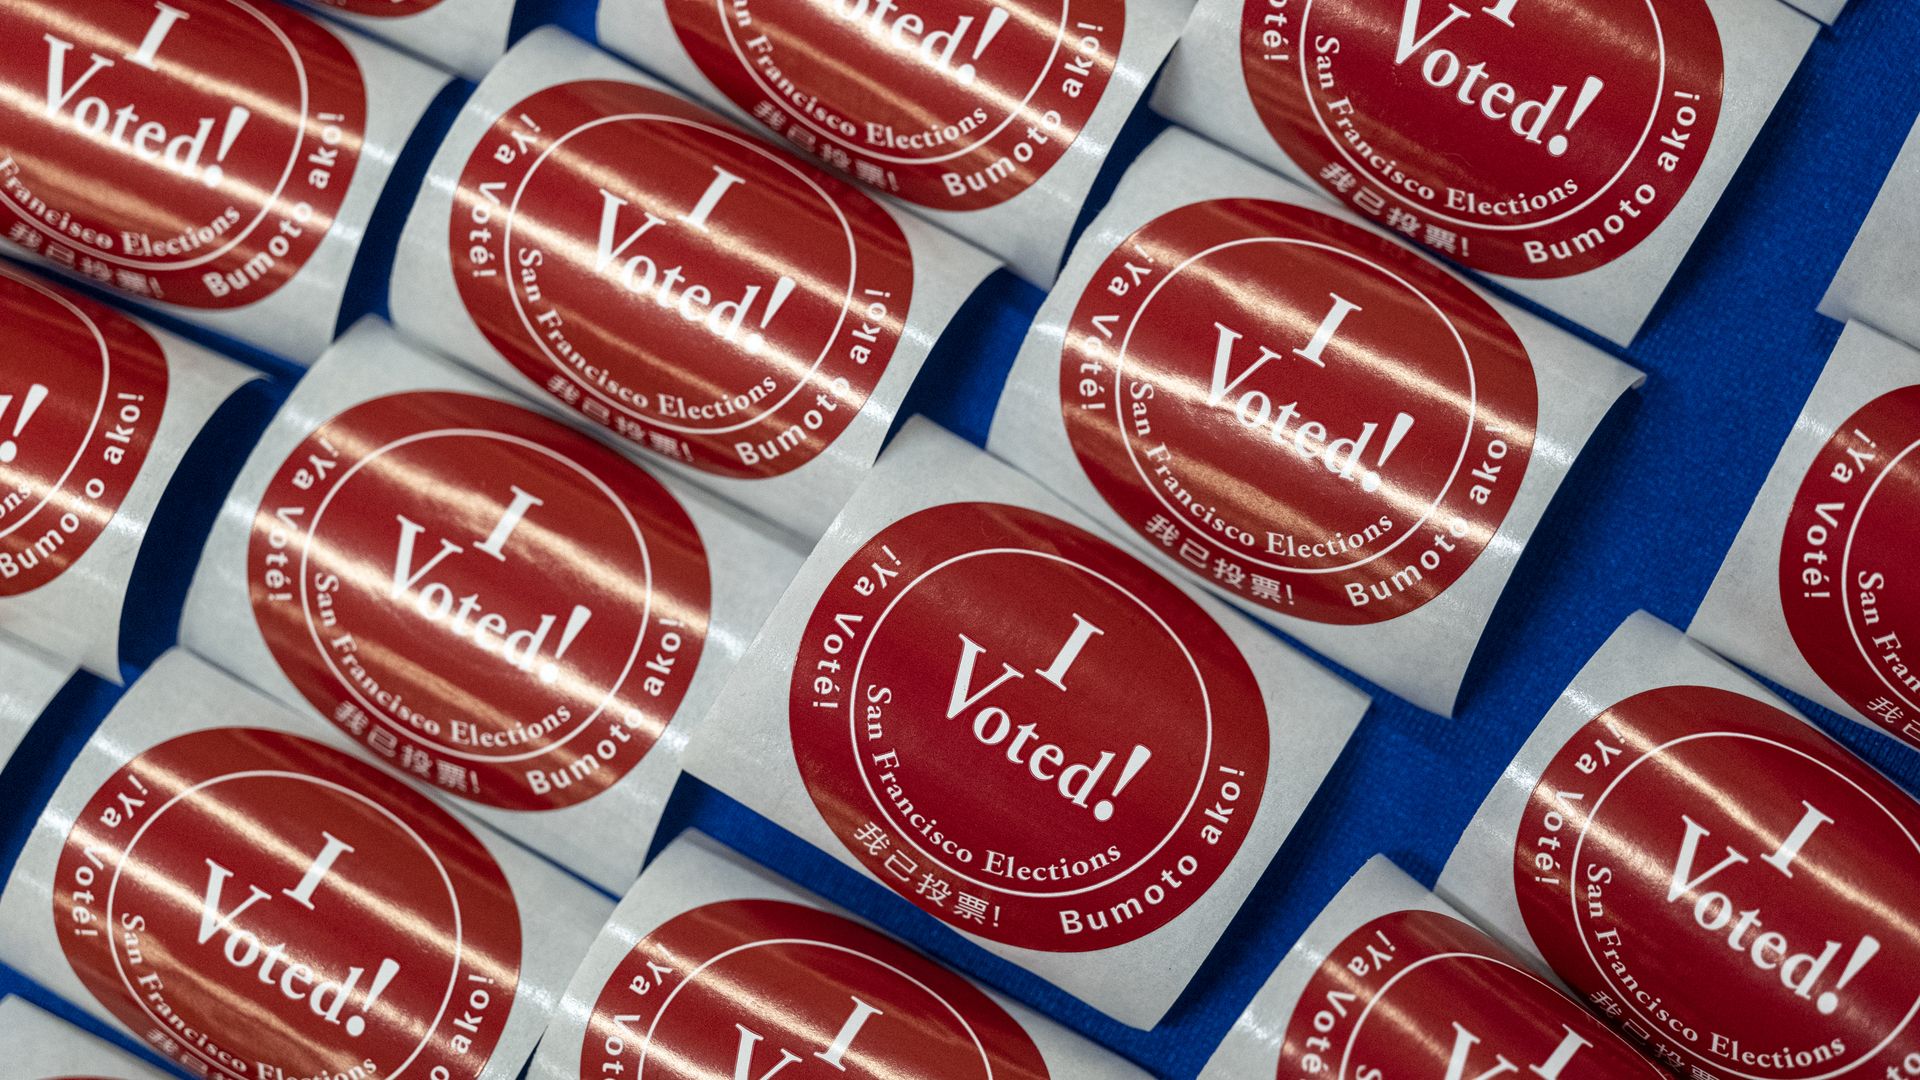 Photo of rolls of red "I Voted!" stickers